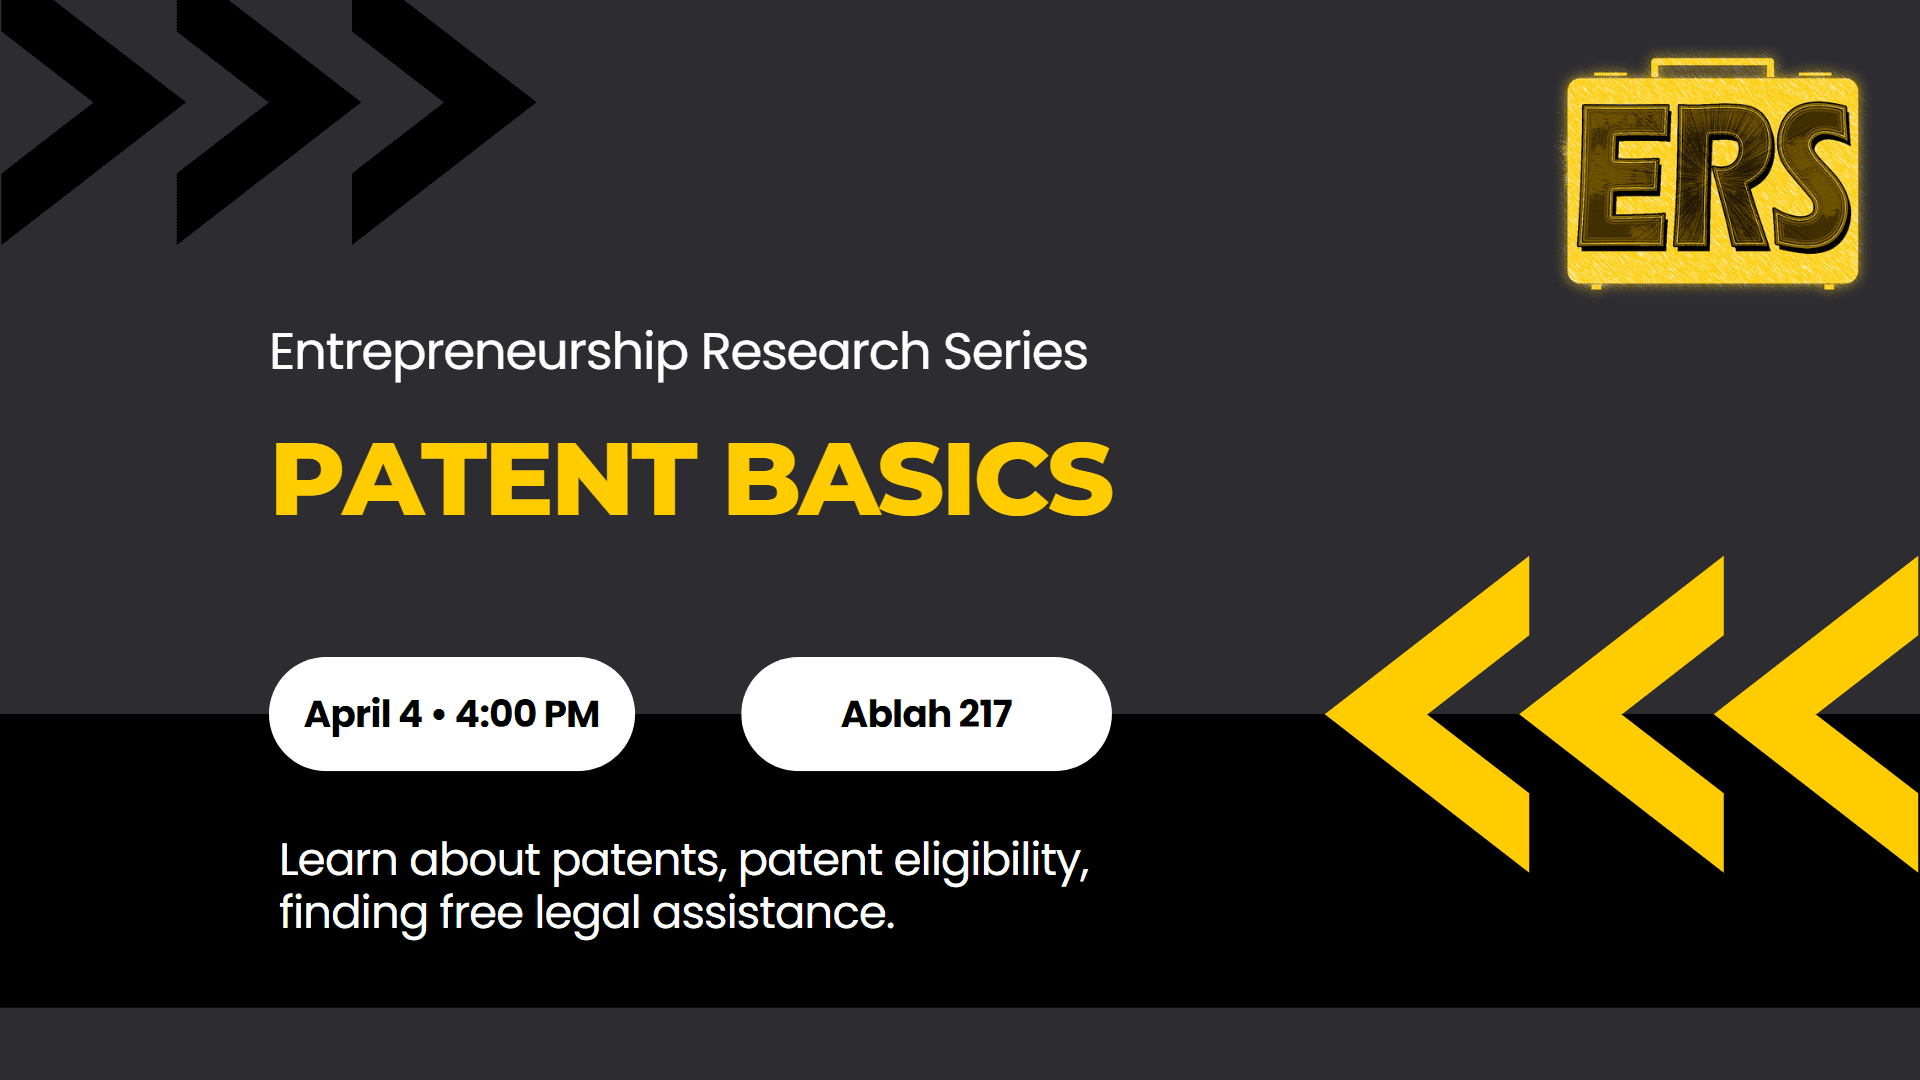 Graphic with the text, "Entrepreneurship Research Series Patent Basics April 4 • 4:00 PM Ablah 217 Learn about patents, patent eligibility, finding free legal assistance."